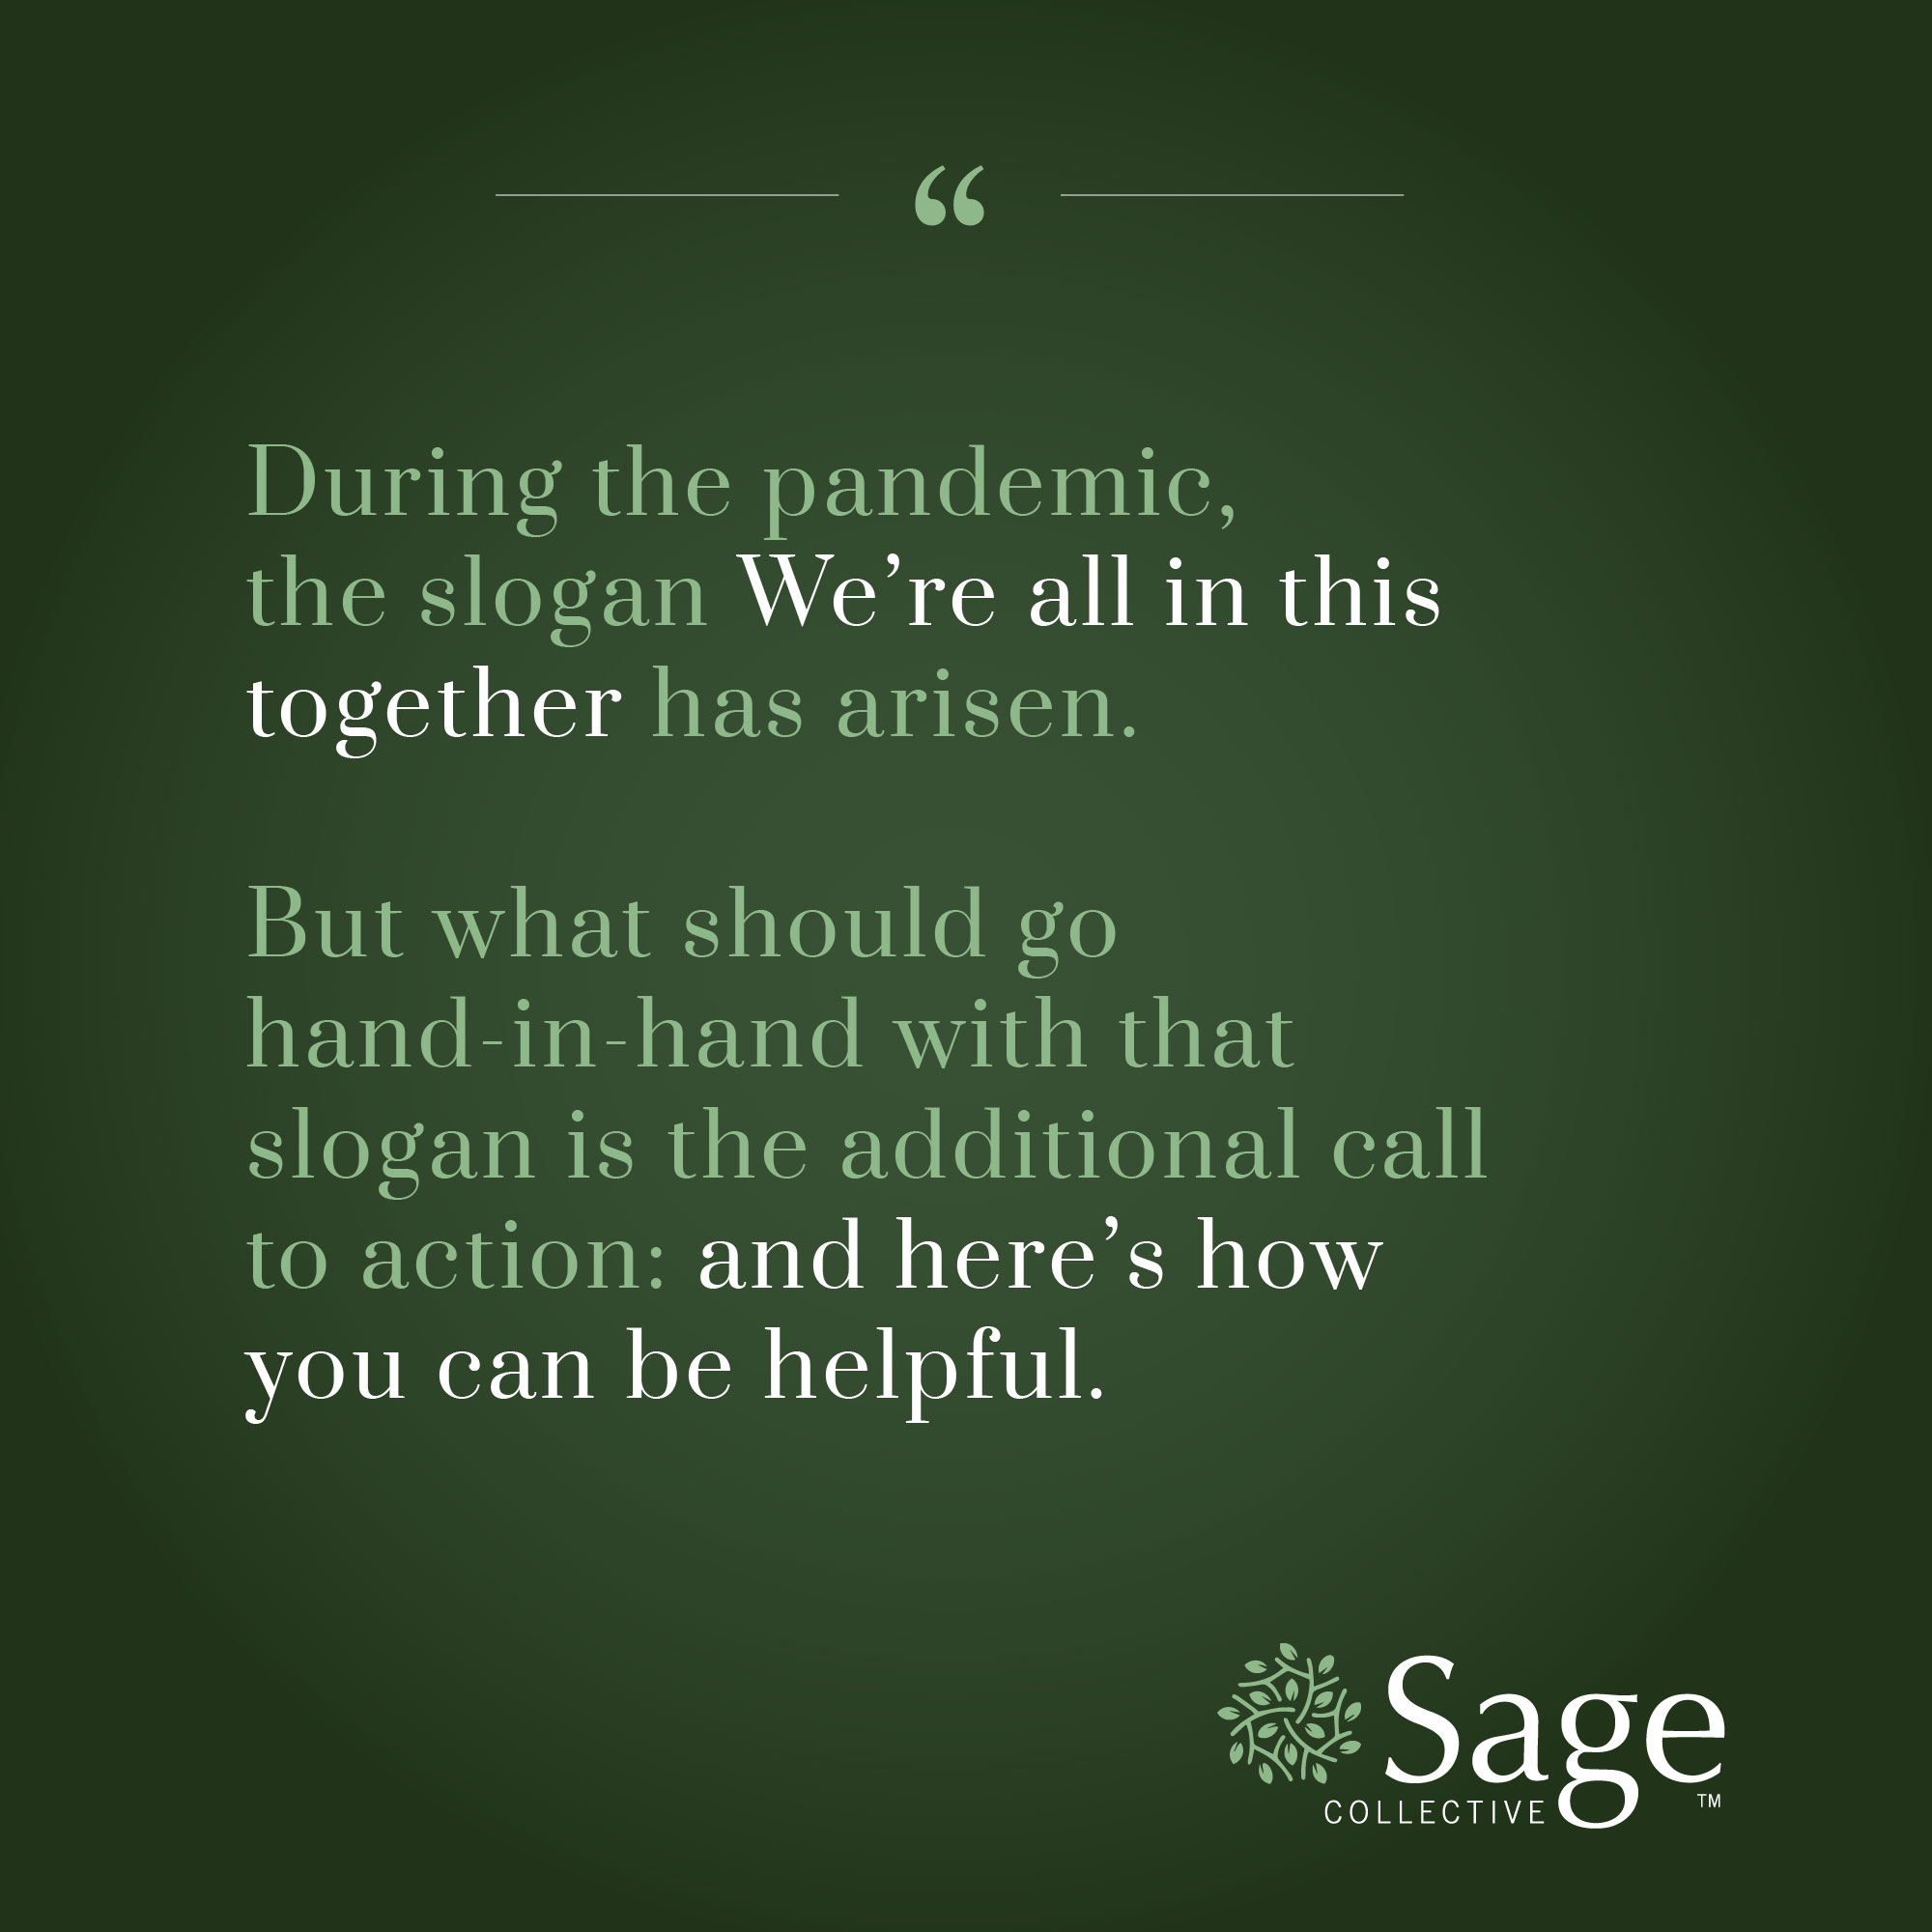 Graphic reads During the pandemic, the slogan We're all in this together has arisen, but what should go hand in hand with that slogan is the additional call to action: and here's how you can be helpful